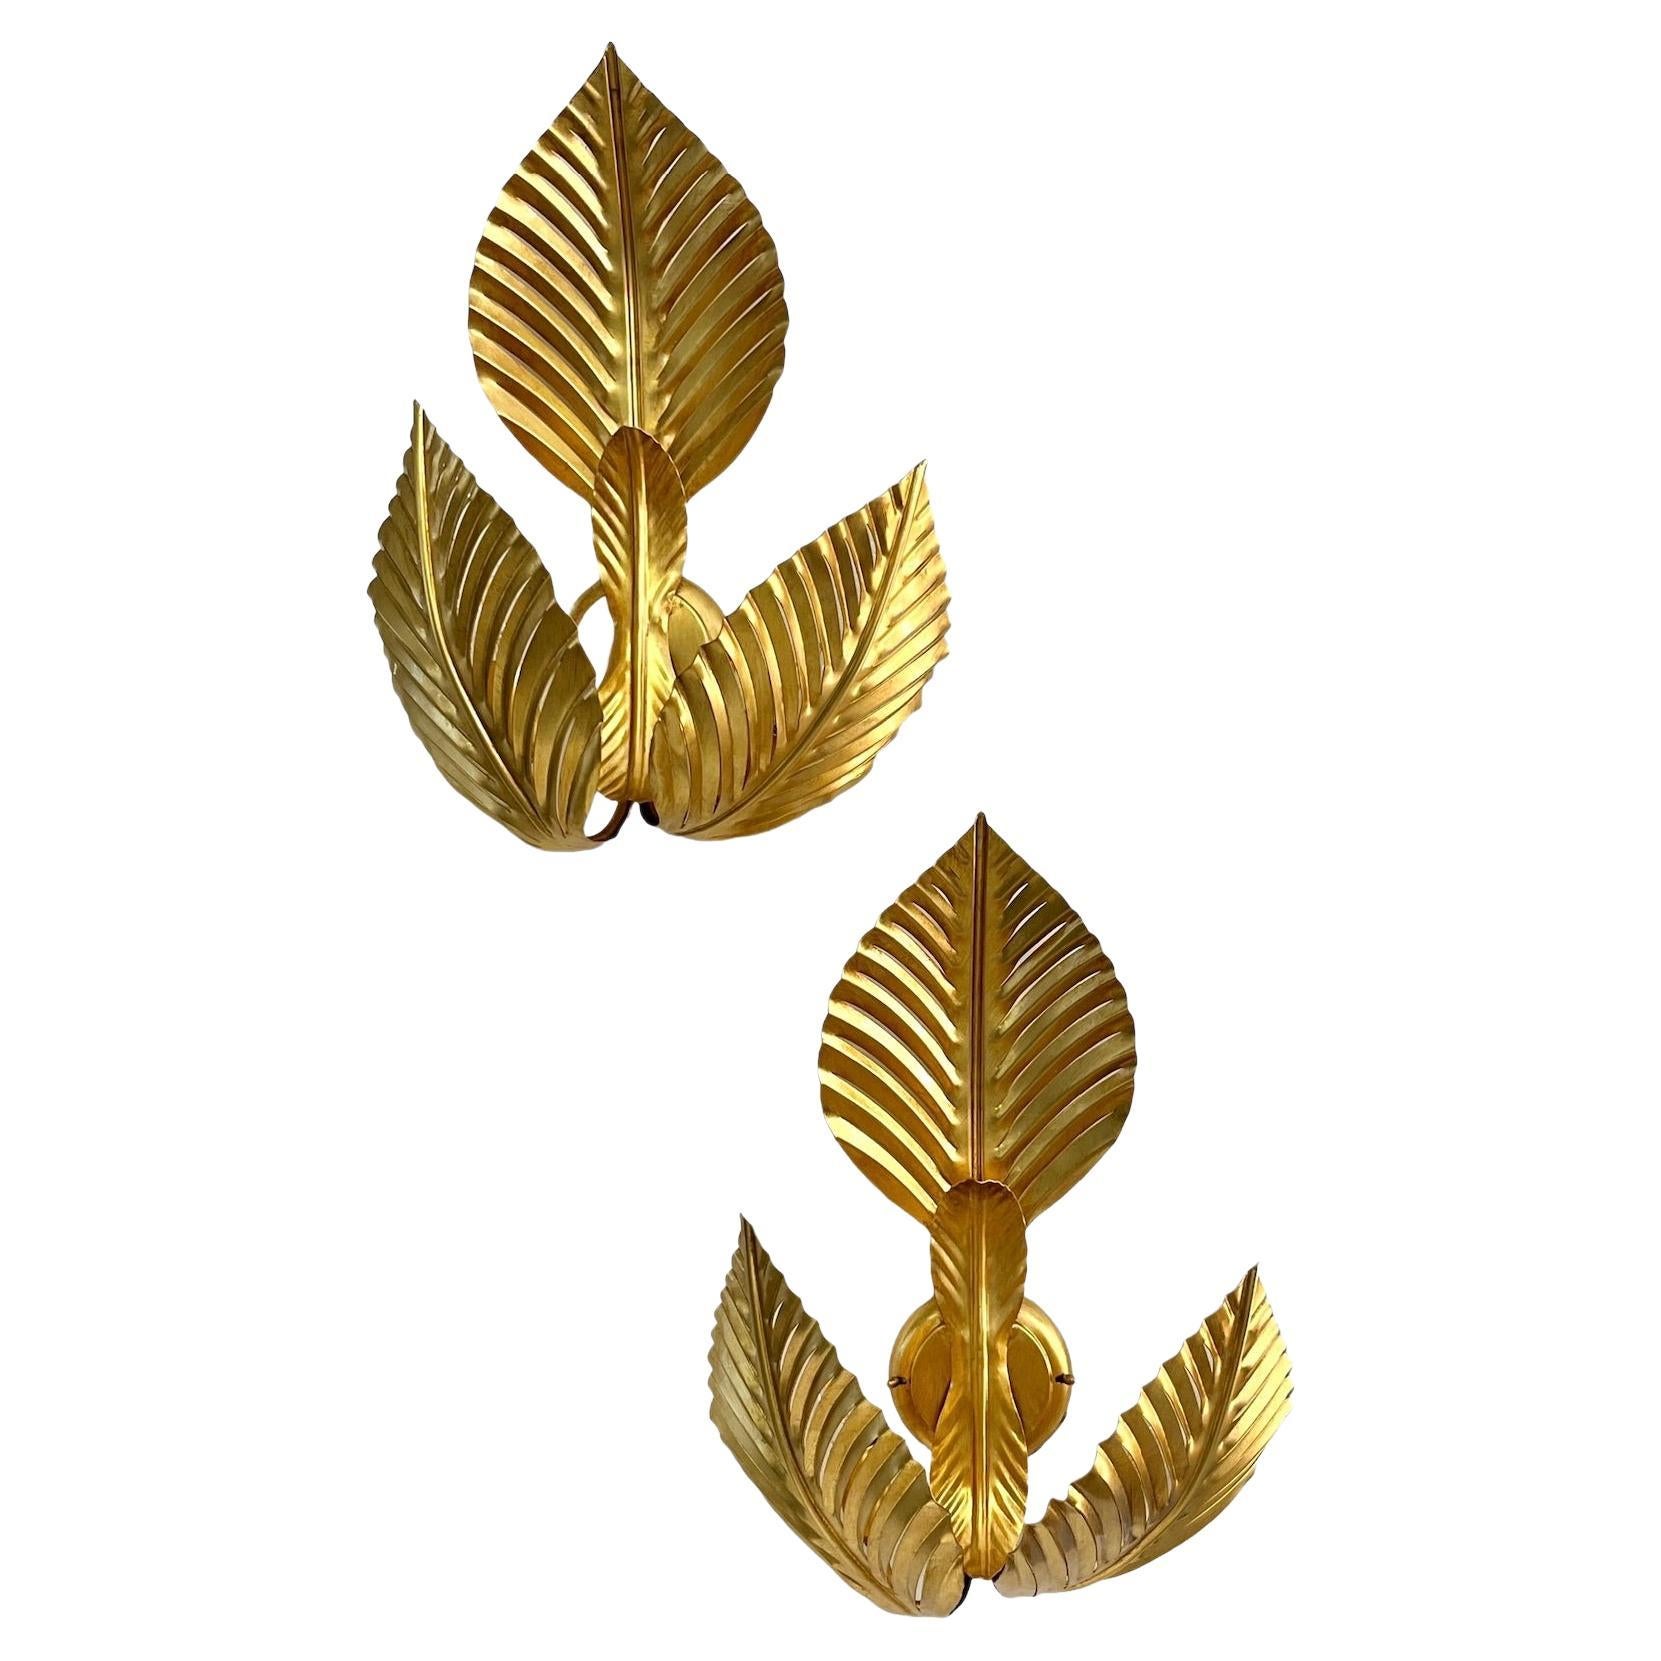 Contemporary Italian Art Deco Design Pair of Hand Made Gold Metal 3-Leaf Sconces For Sale